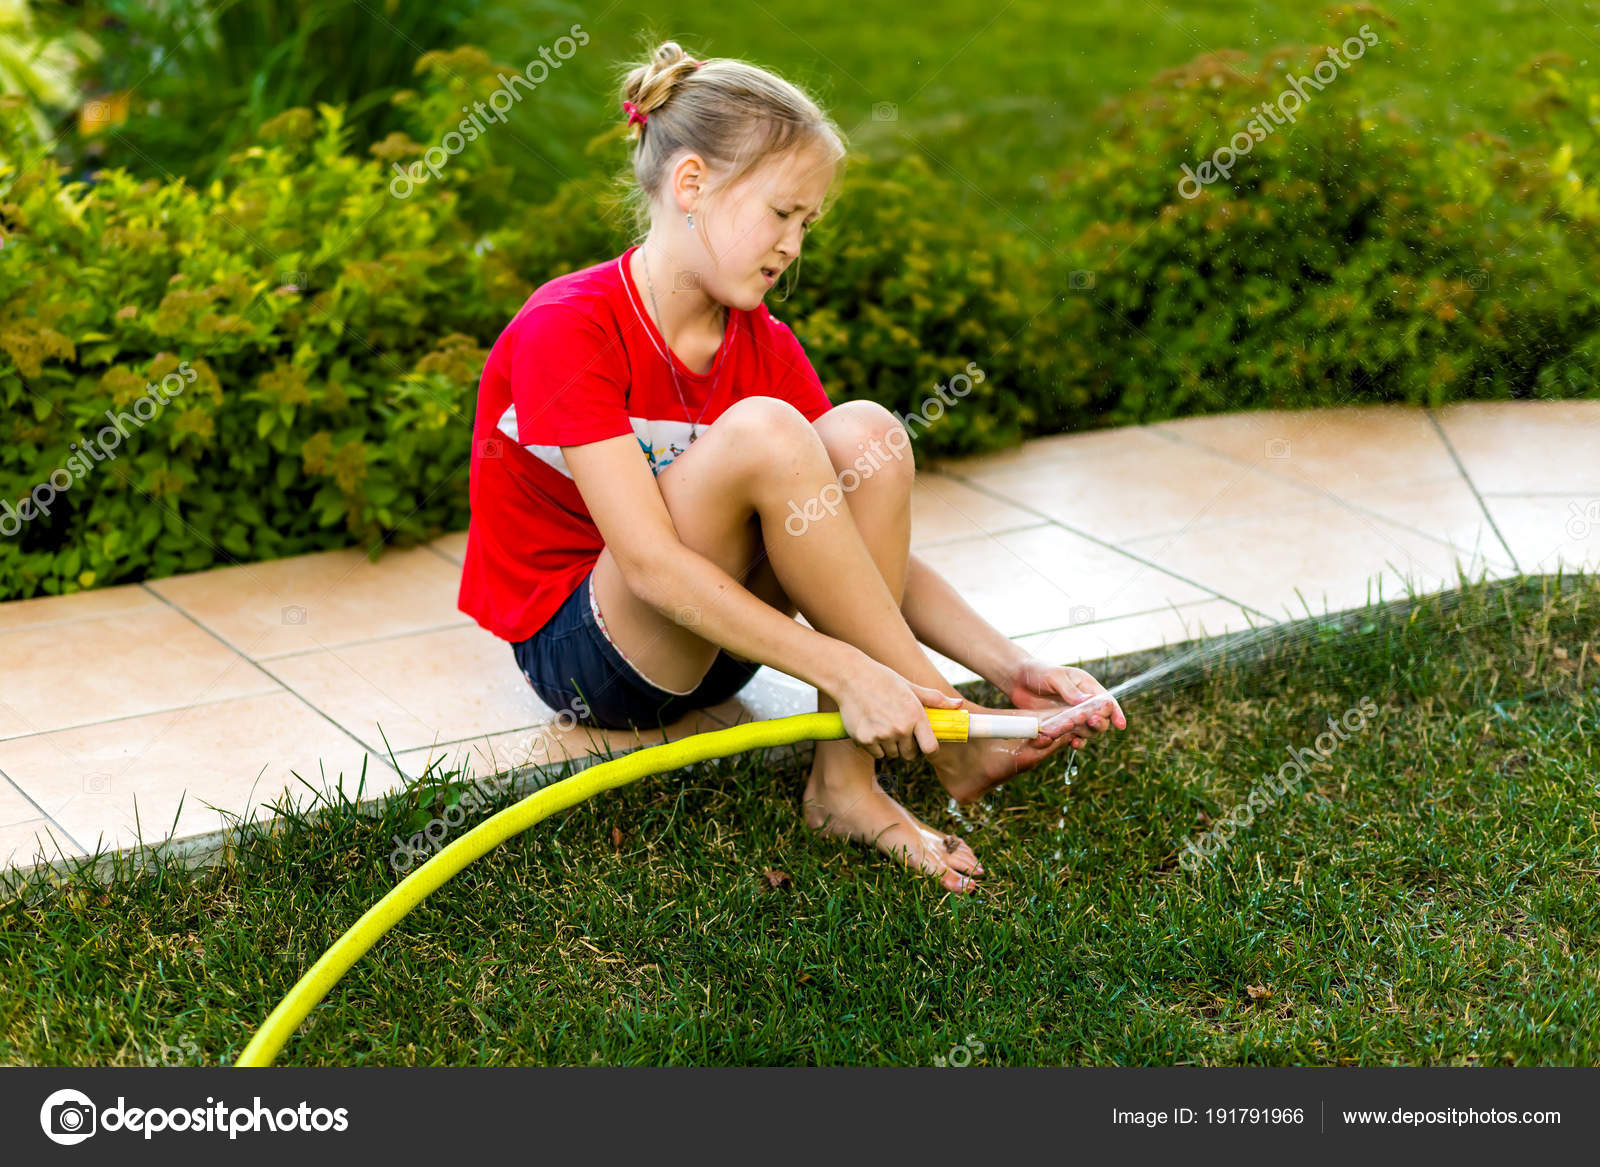 Girl Washes Her Feet With Water From A Hose - Stock Photo © Most55.